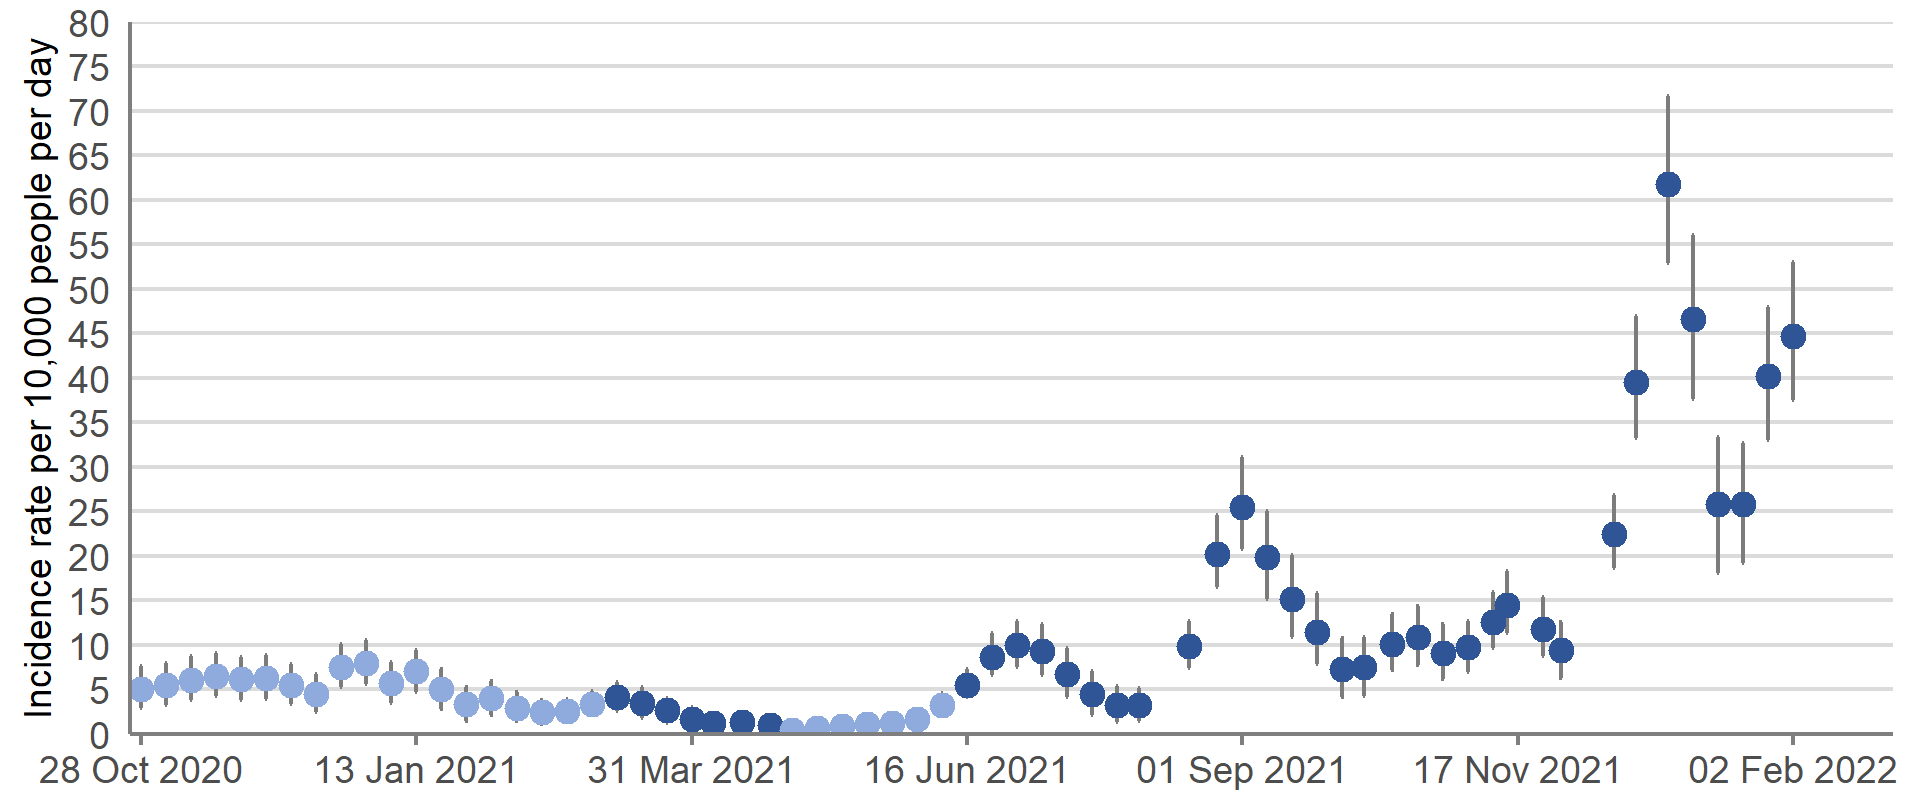 The official reported/indicative estimates of incidence rates in Scotland reached the highest peak since the start of the pandemic in the week 26 December 2021 to 1 January 2022. The incidence rate then decreased in the two weeks to 15 January 2022, before increasing again in recent weeks.